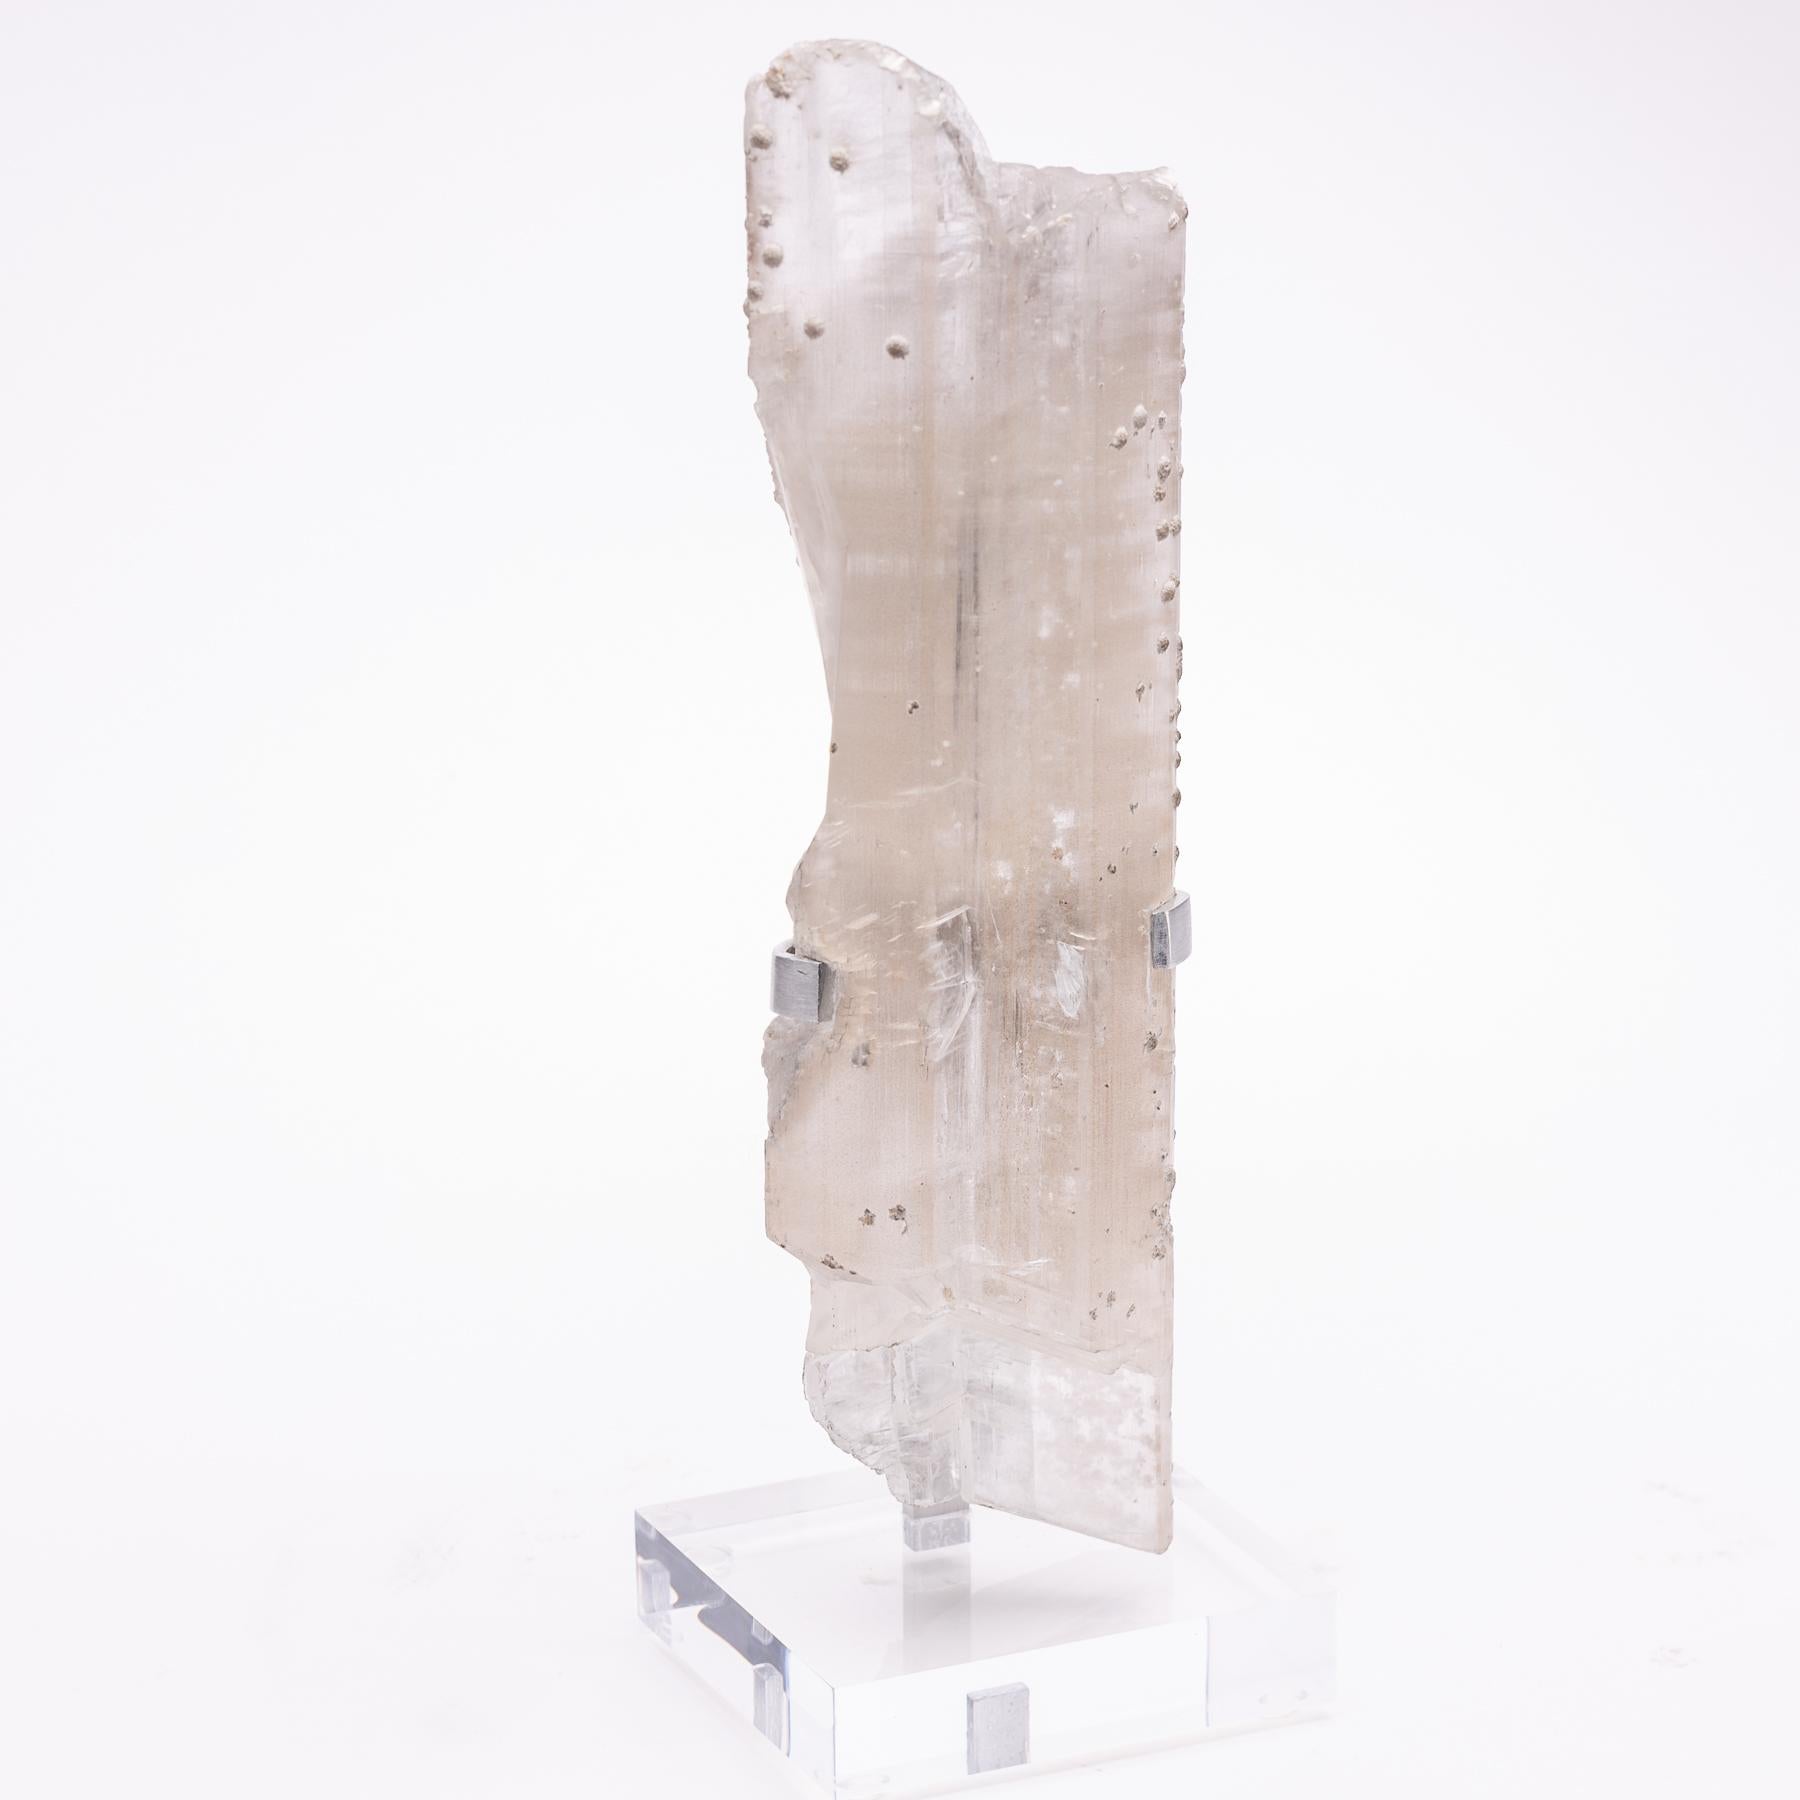 Mexican Selenite Crystal Mounted on Custom Acrylic and Metal Stand from Naica Mine